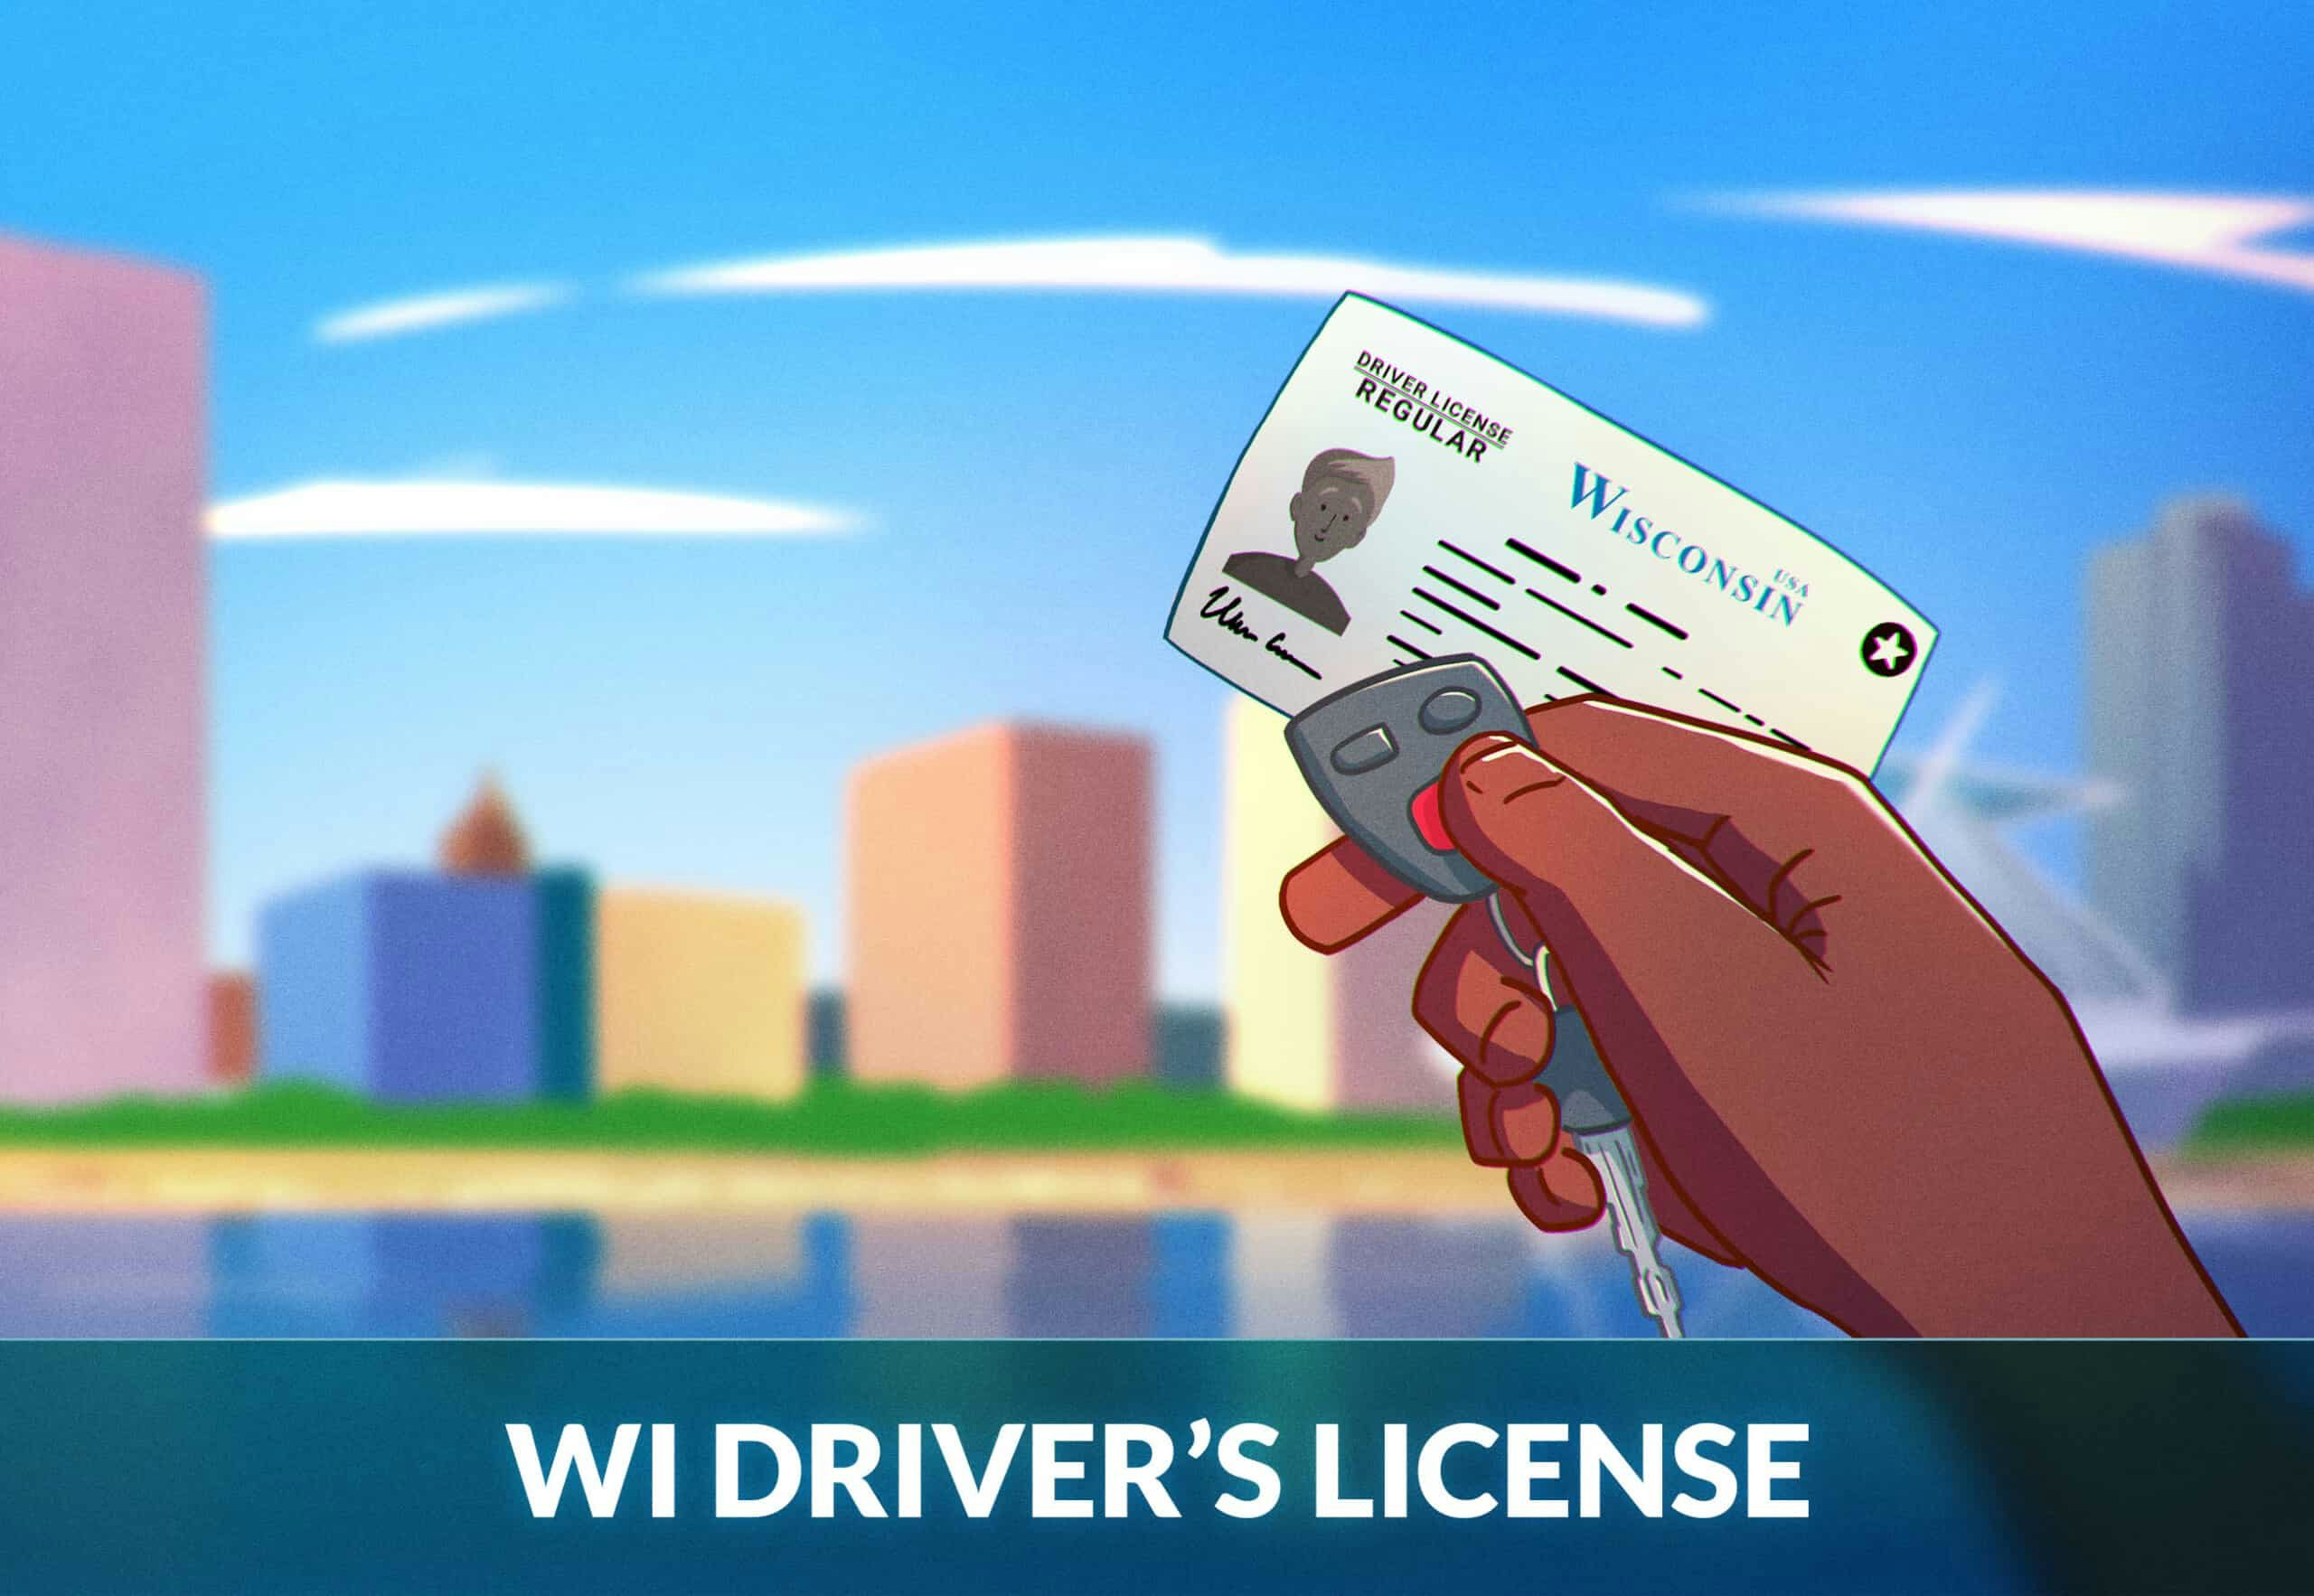 Getting Your Wisconsin Drivers License Requirements & Steps